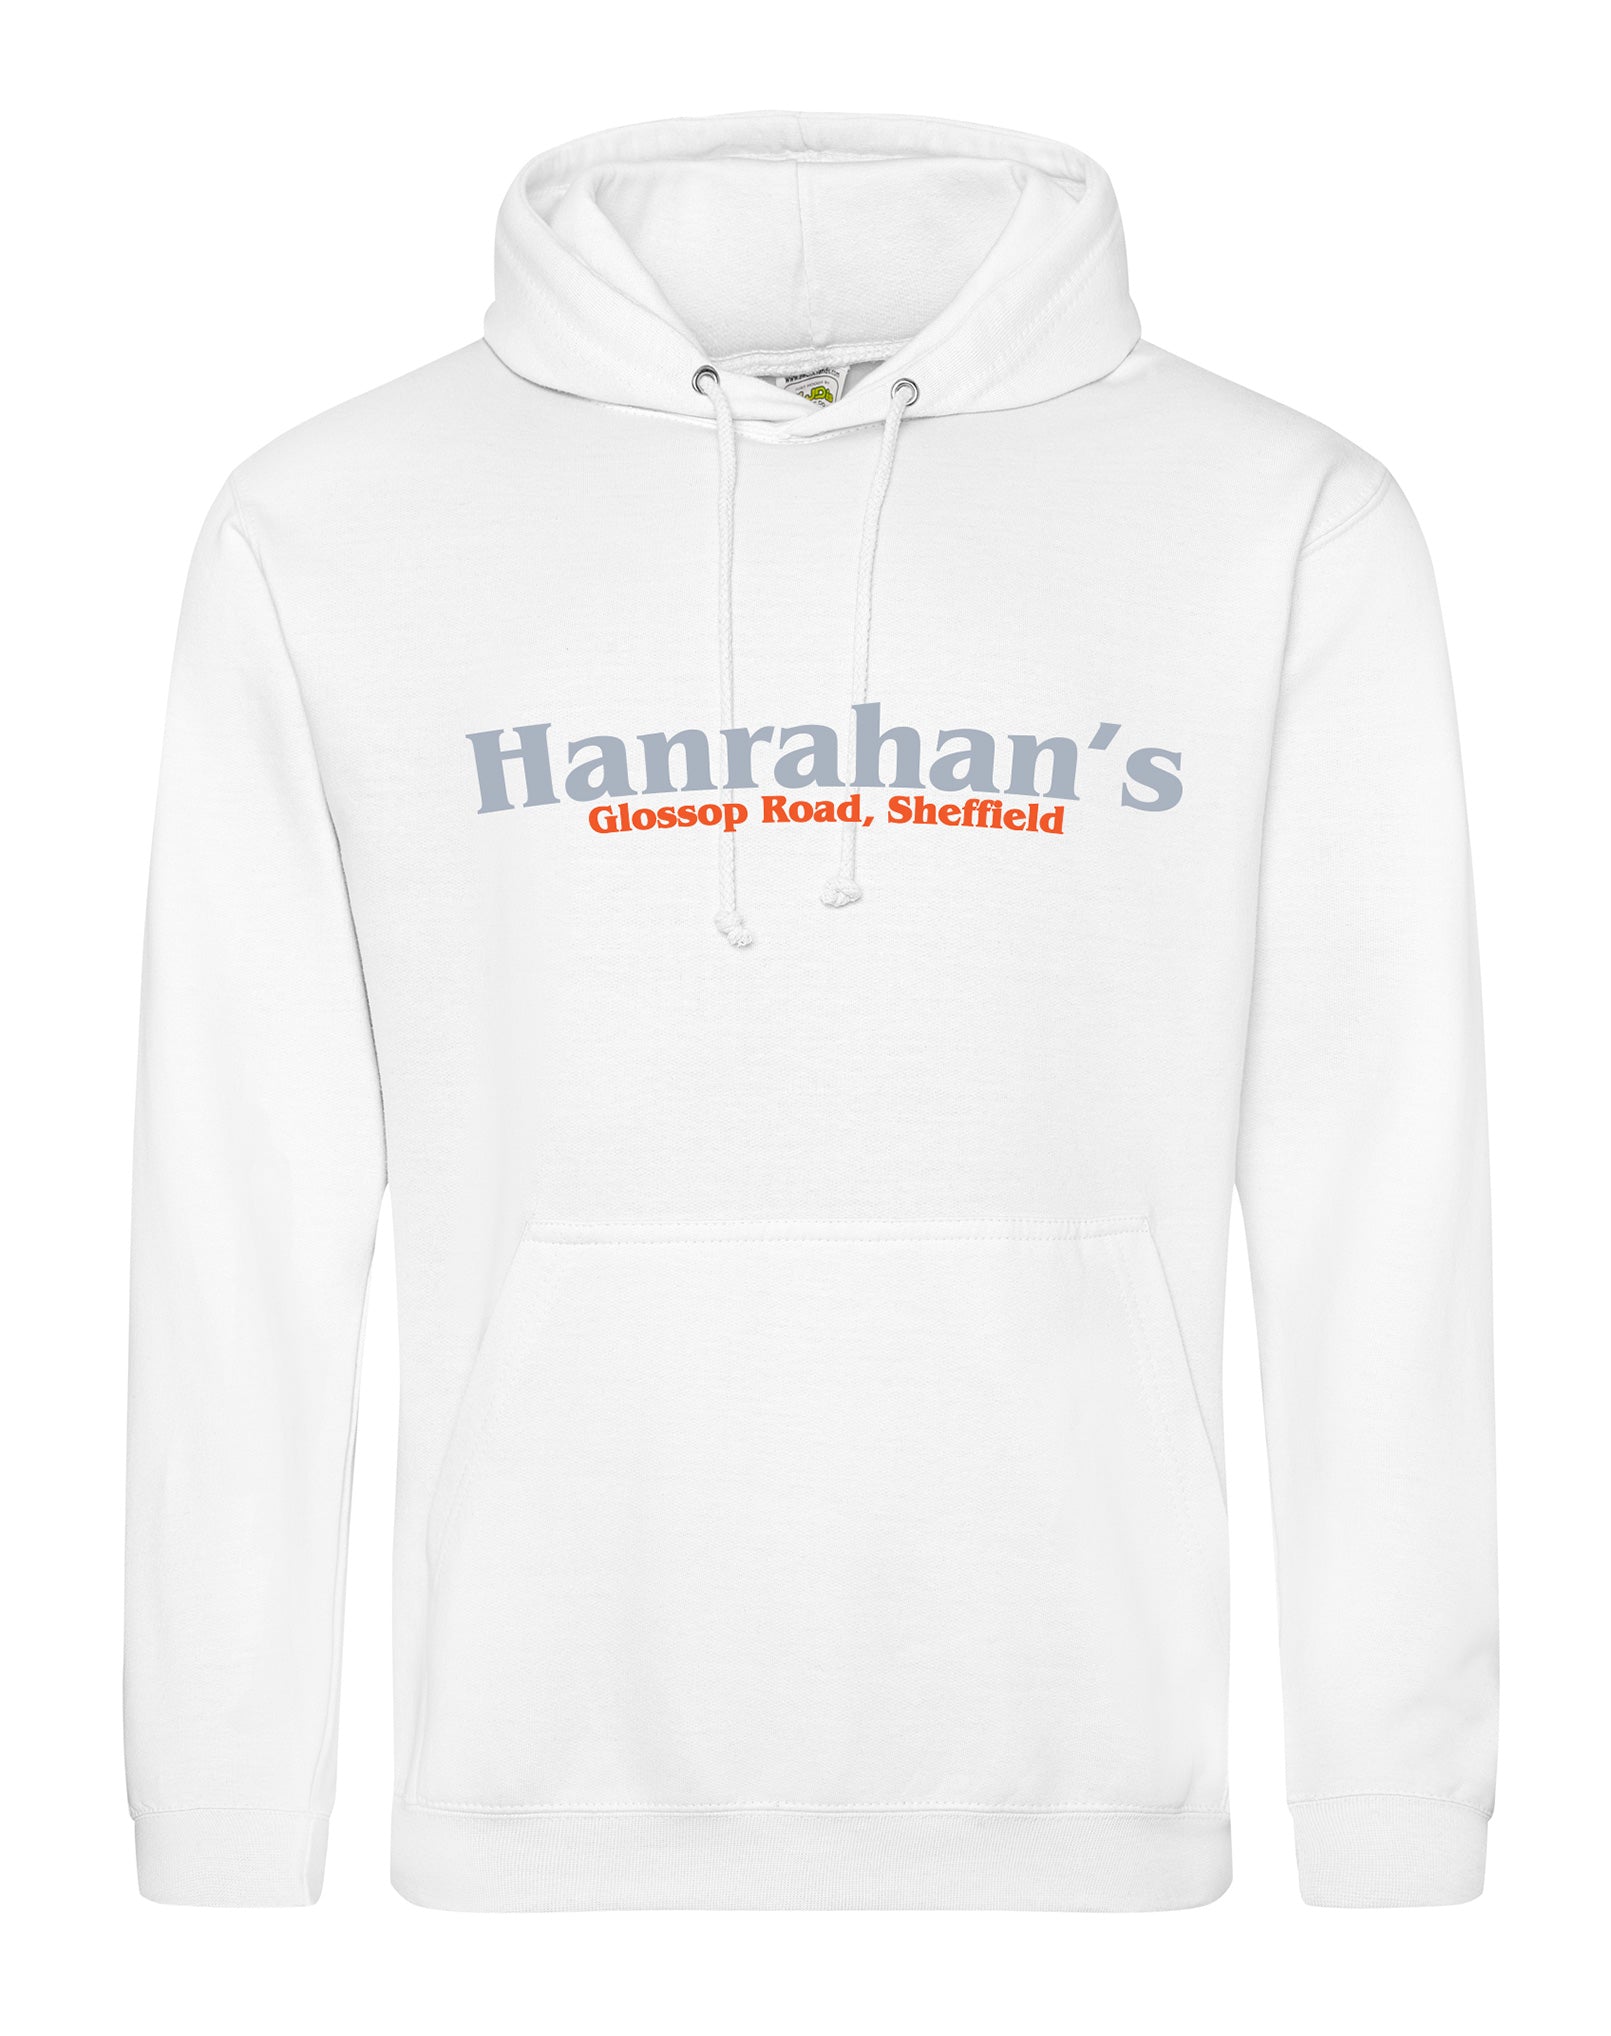 Hanrahan's unisex fit hoodie - various colours - Dirty Stop Outs